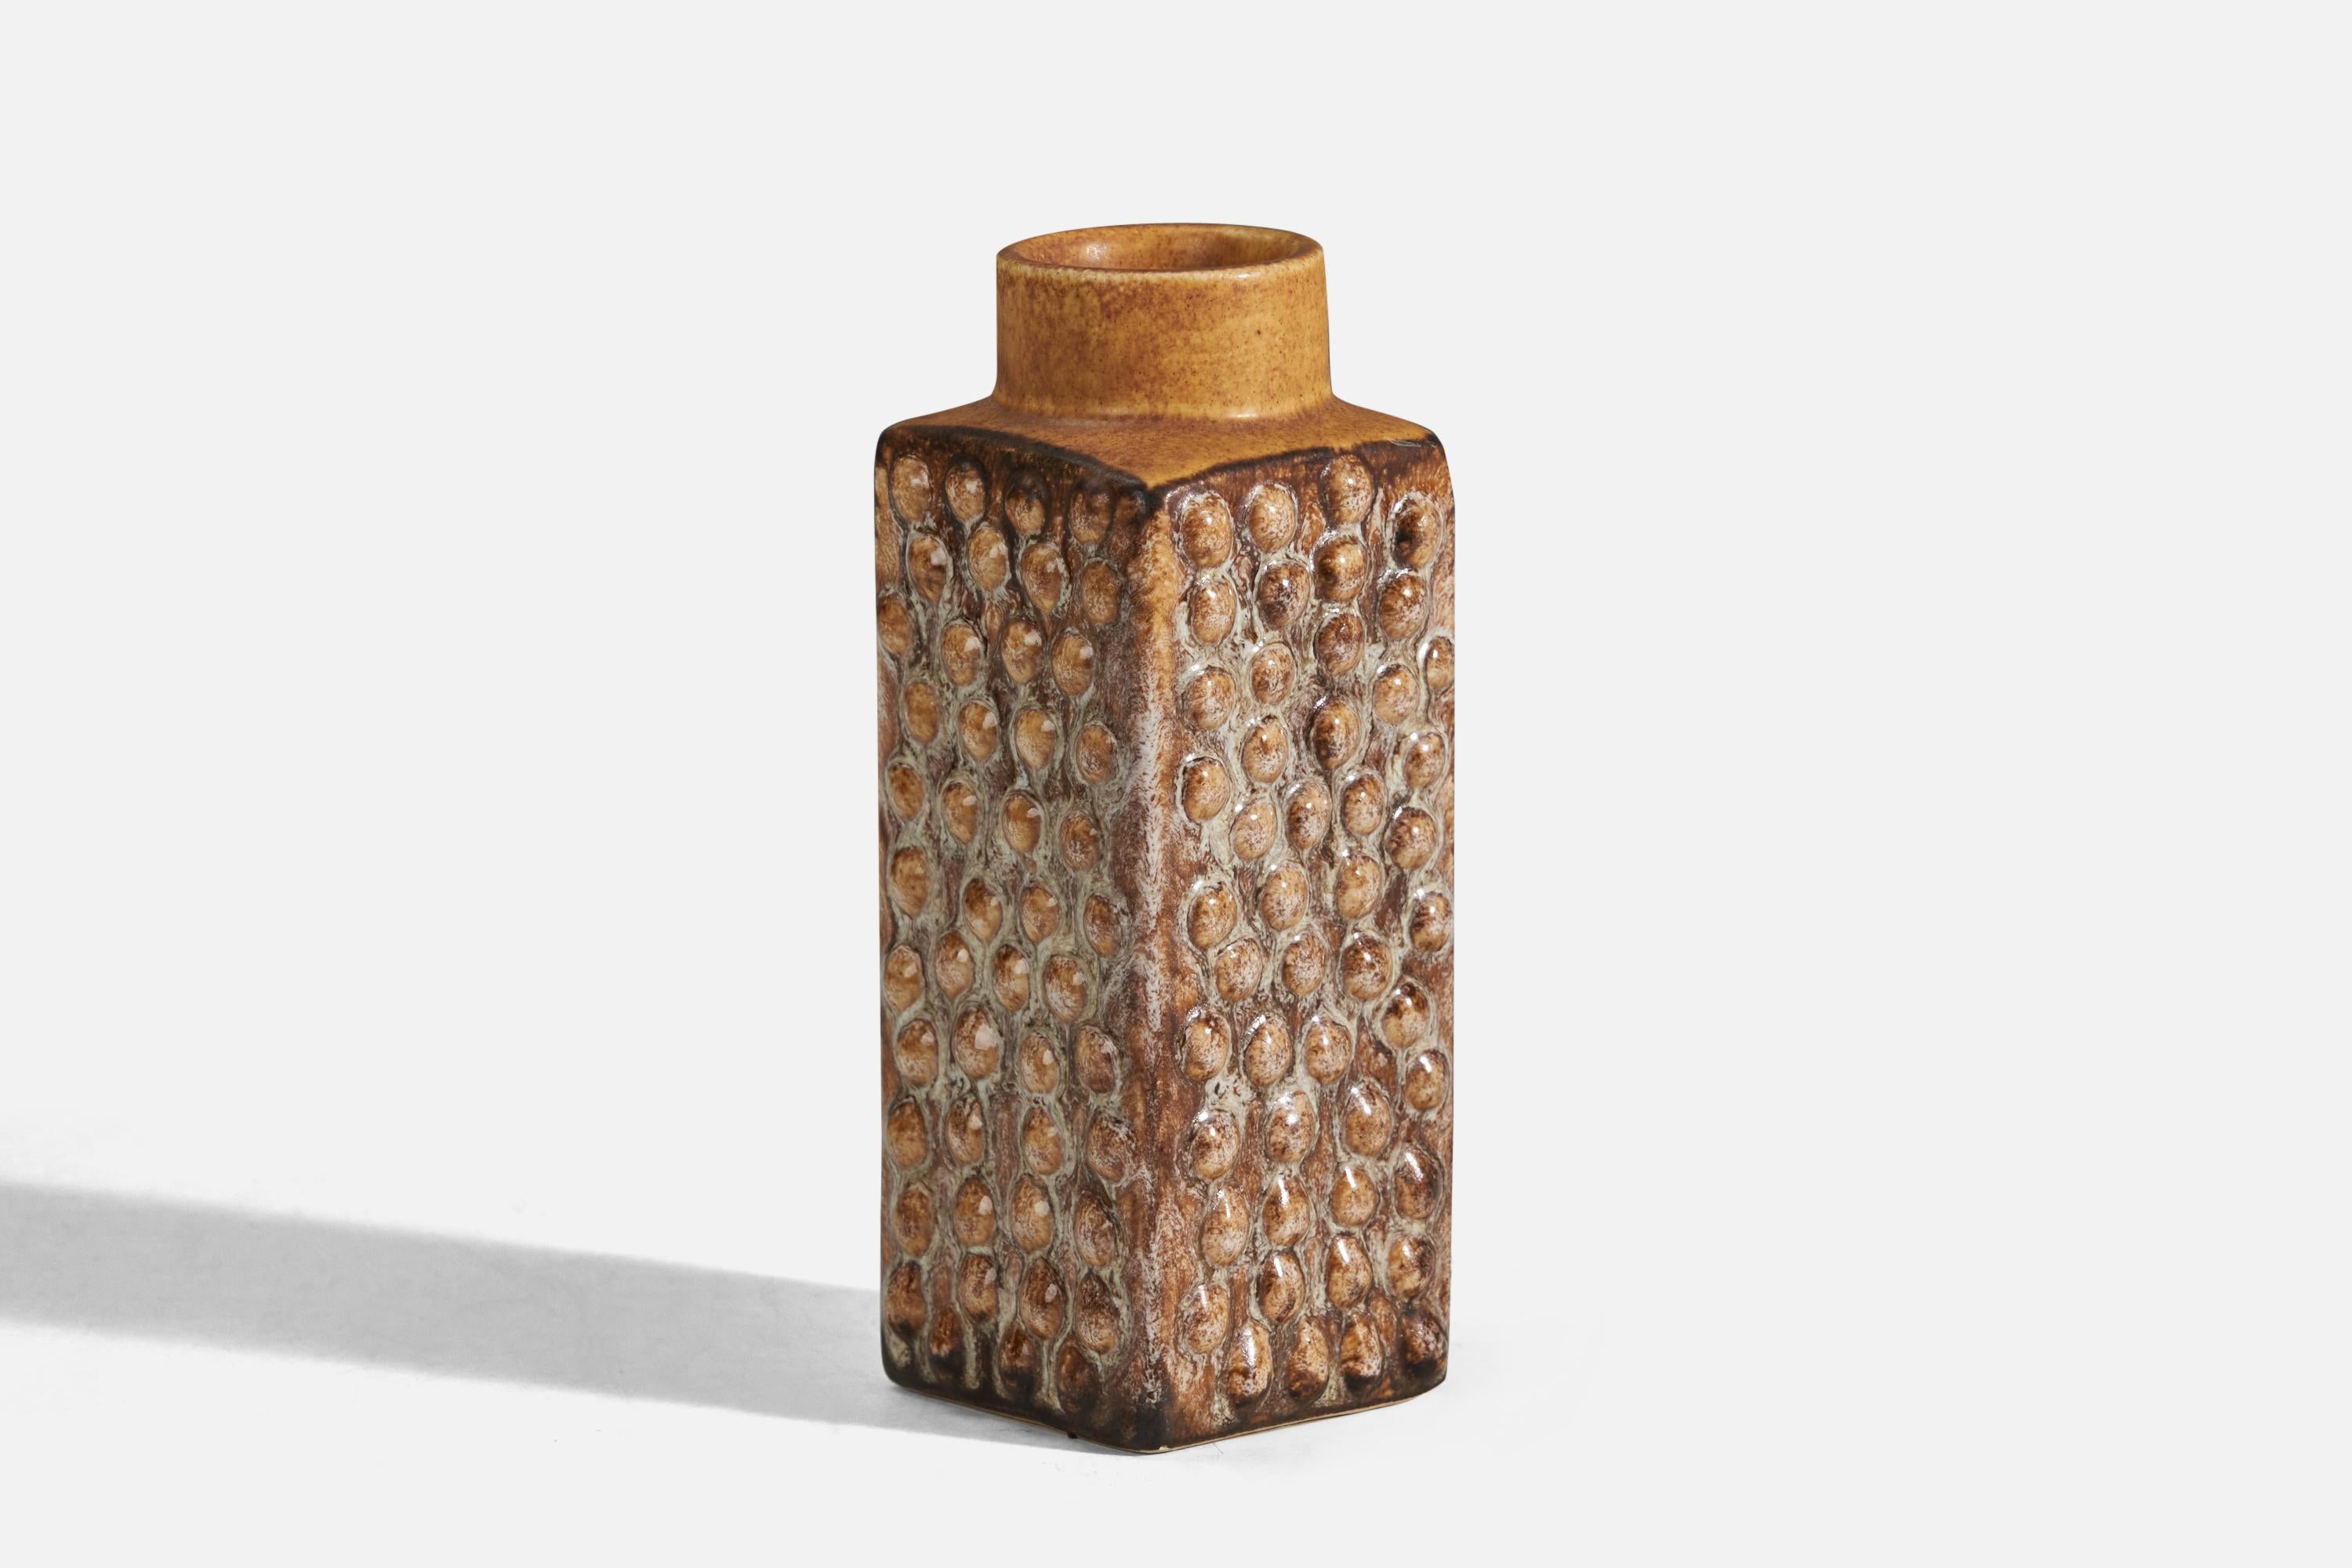 A brown glazed stoneware vase designed and produced in Denmark, 1960s.
   